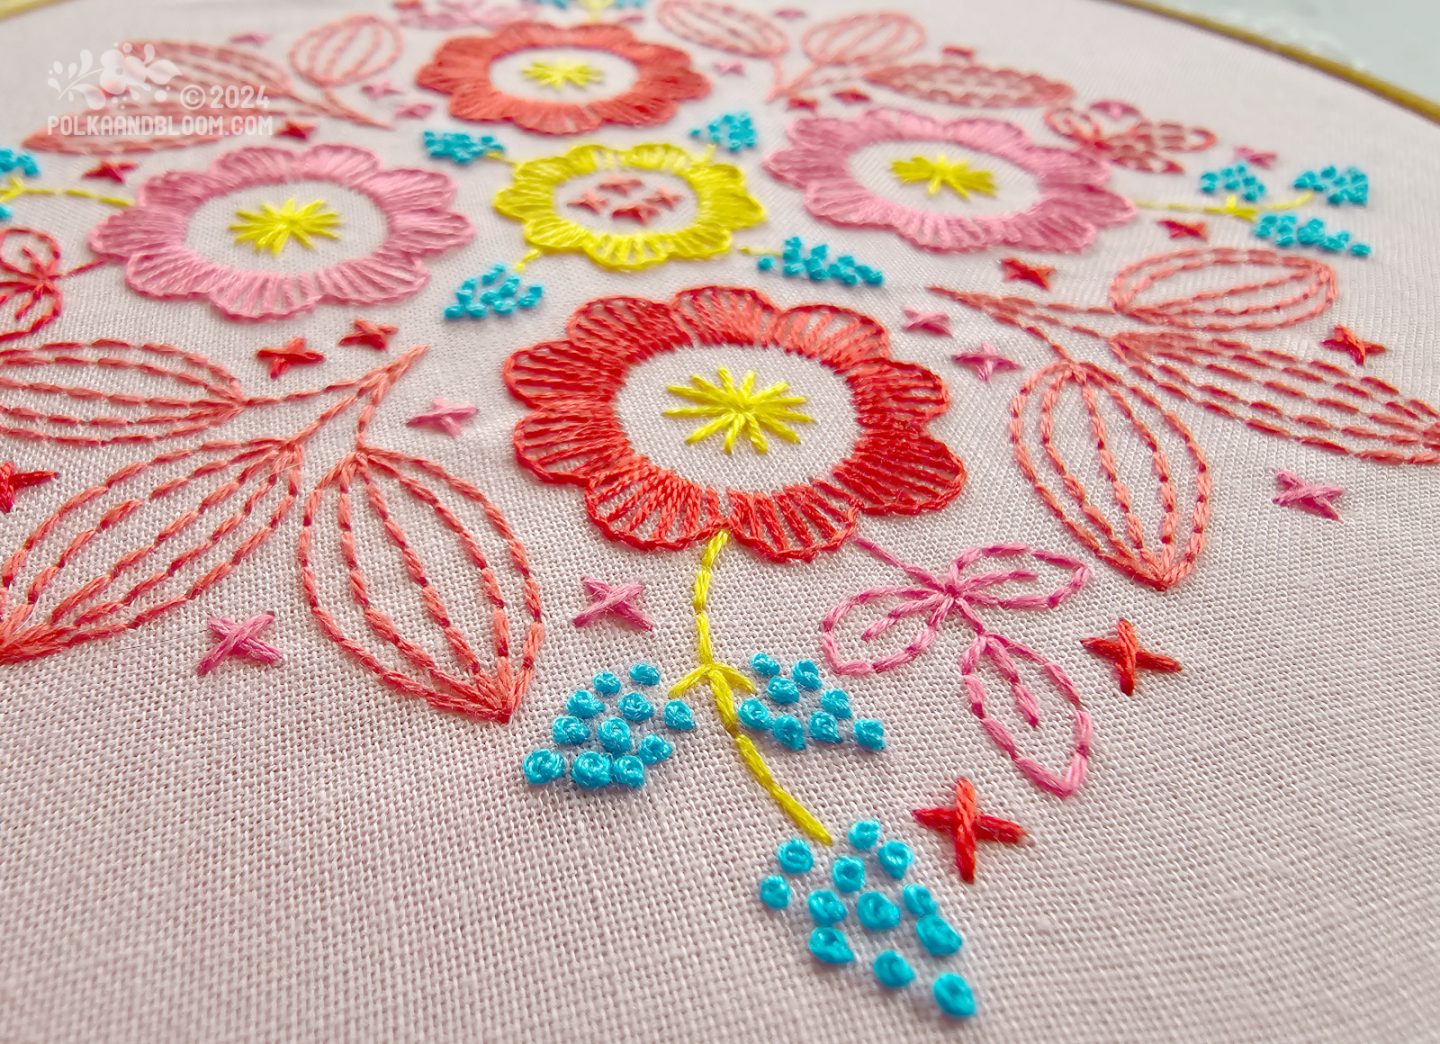 Very close view of an embroidery in red, pink, turquoise and yellow colours on a pink fabric background.